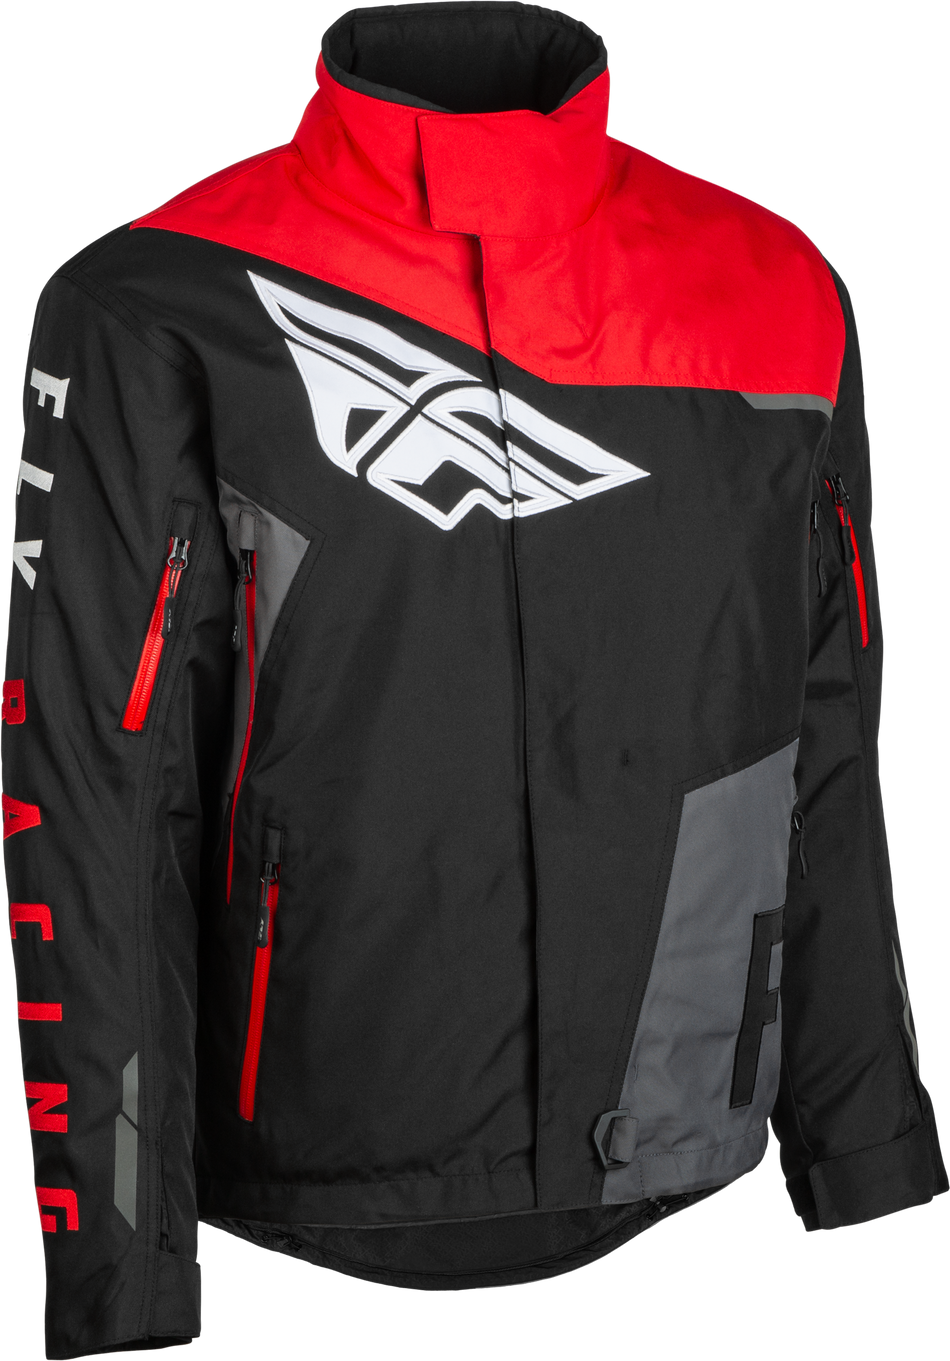 FLY RACING Snx Pro Jacket Black/Grey/Red Md 470-4117M